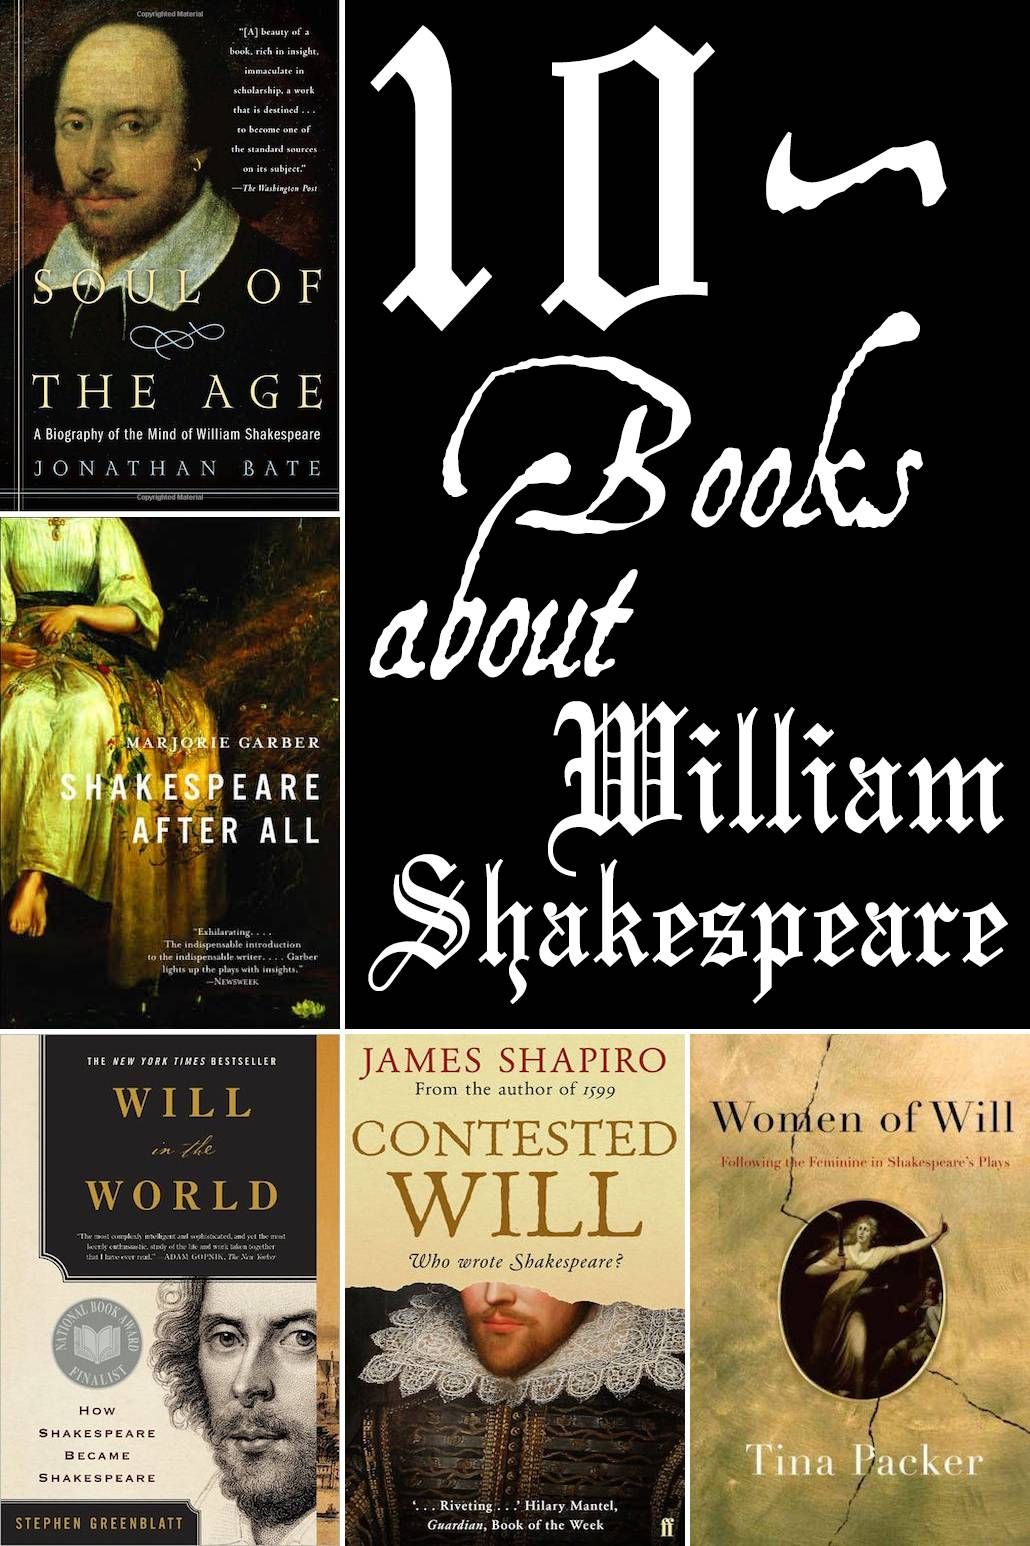 10 books about Shakespeare's life, work, and legacy.